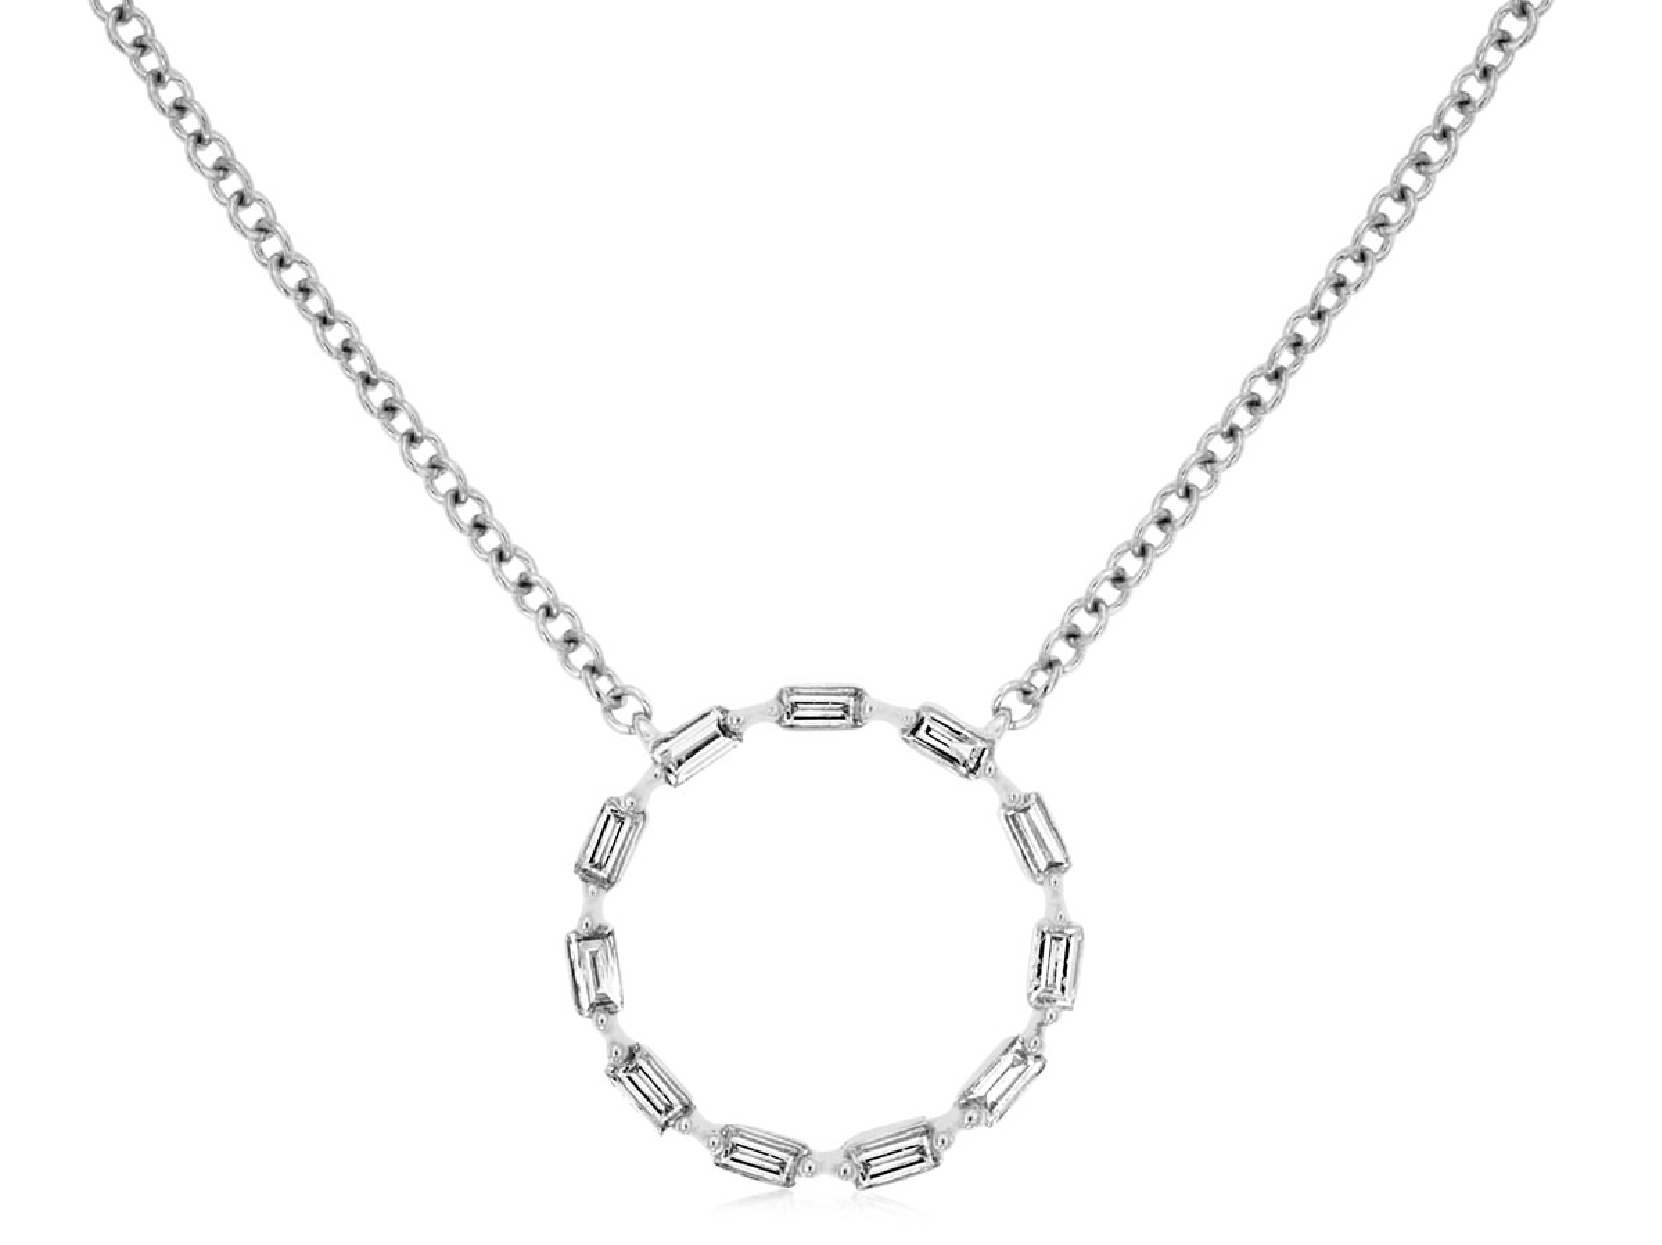 Diamond Circle Necklace
0.25ct

18 Inches